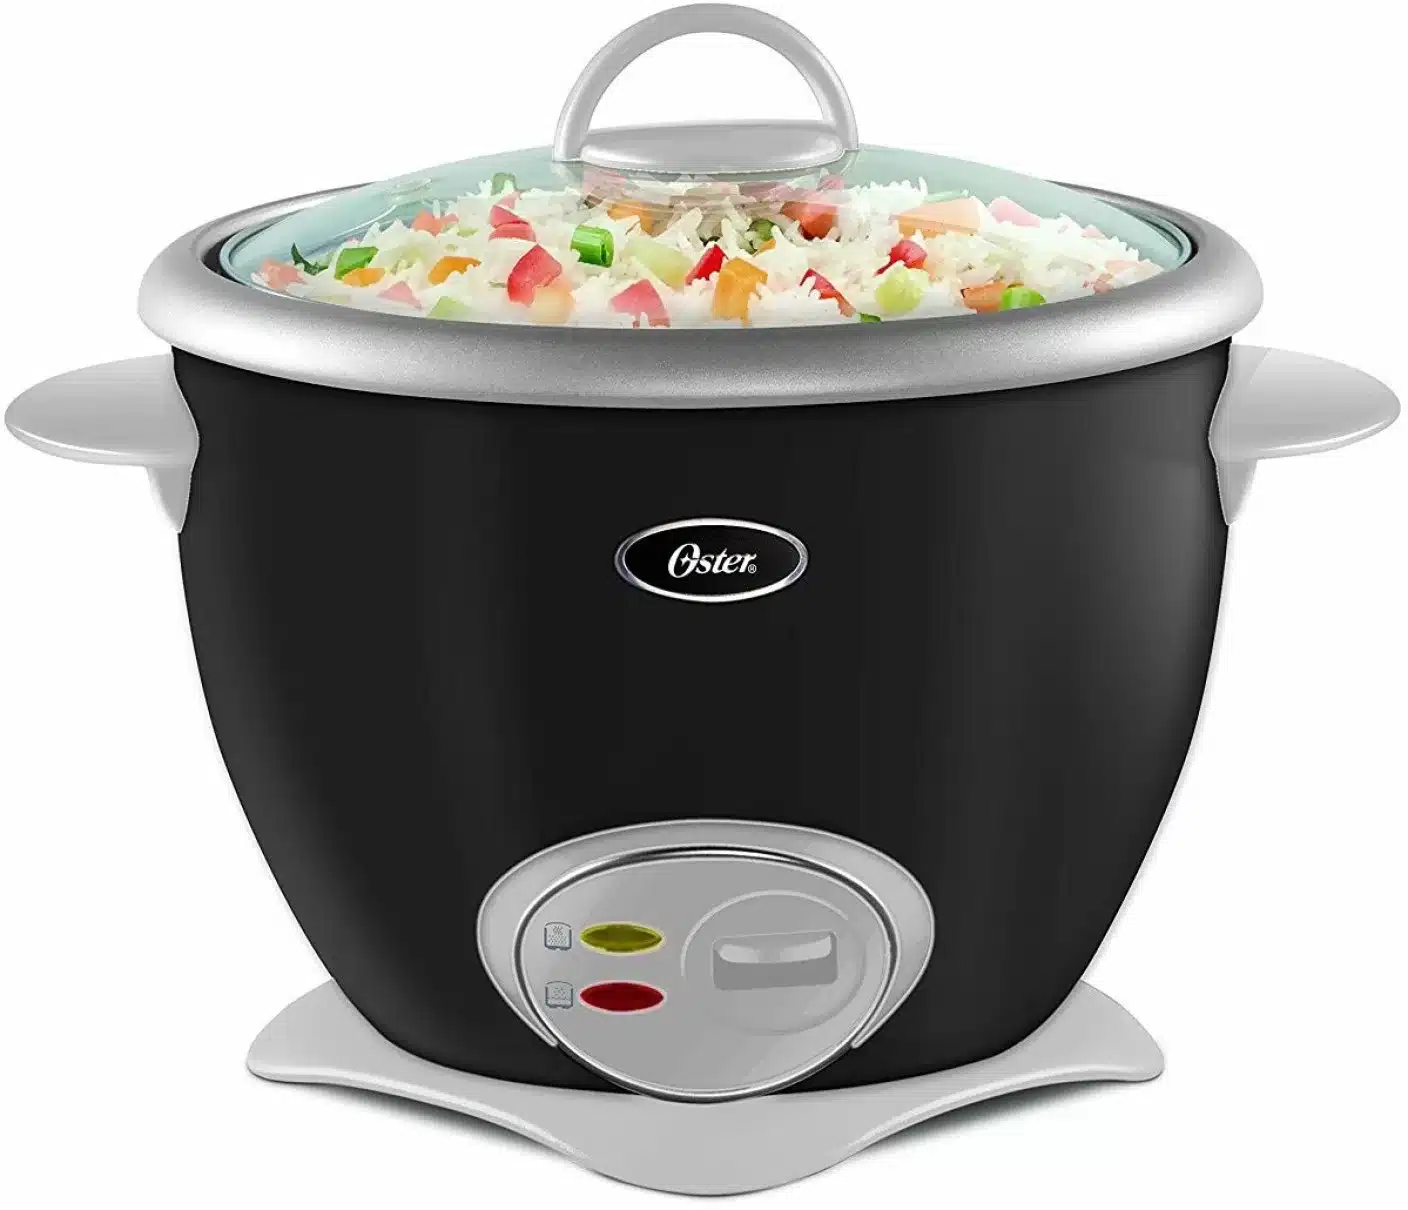 how-to-use-an-oster-rice-cooker-2